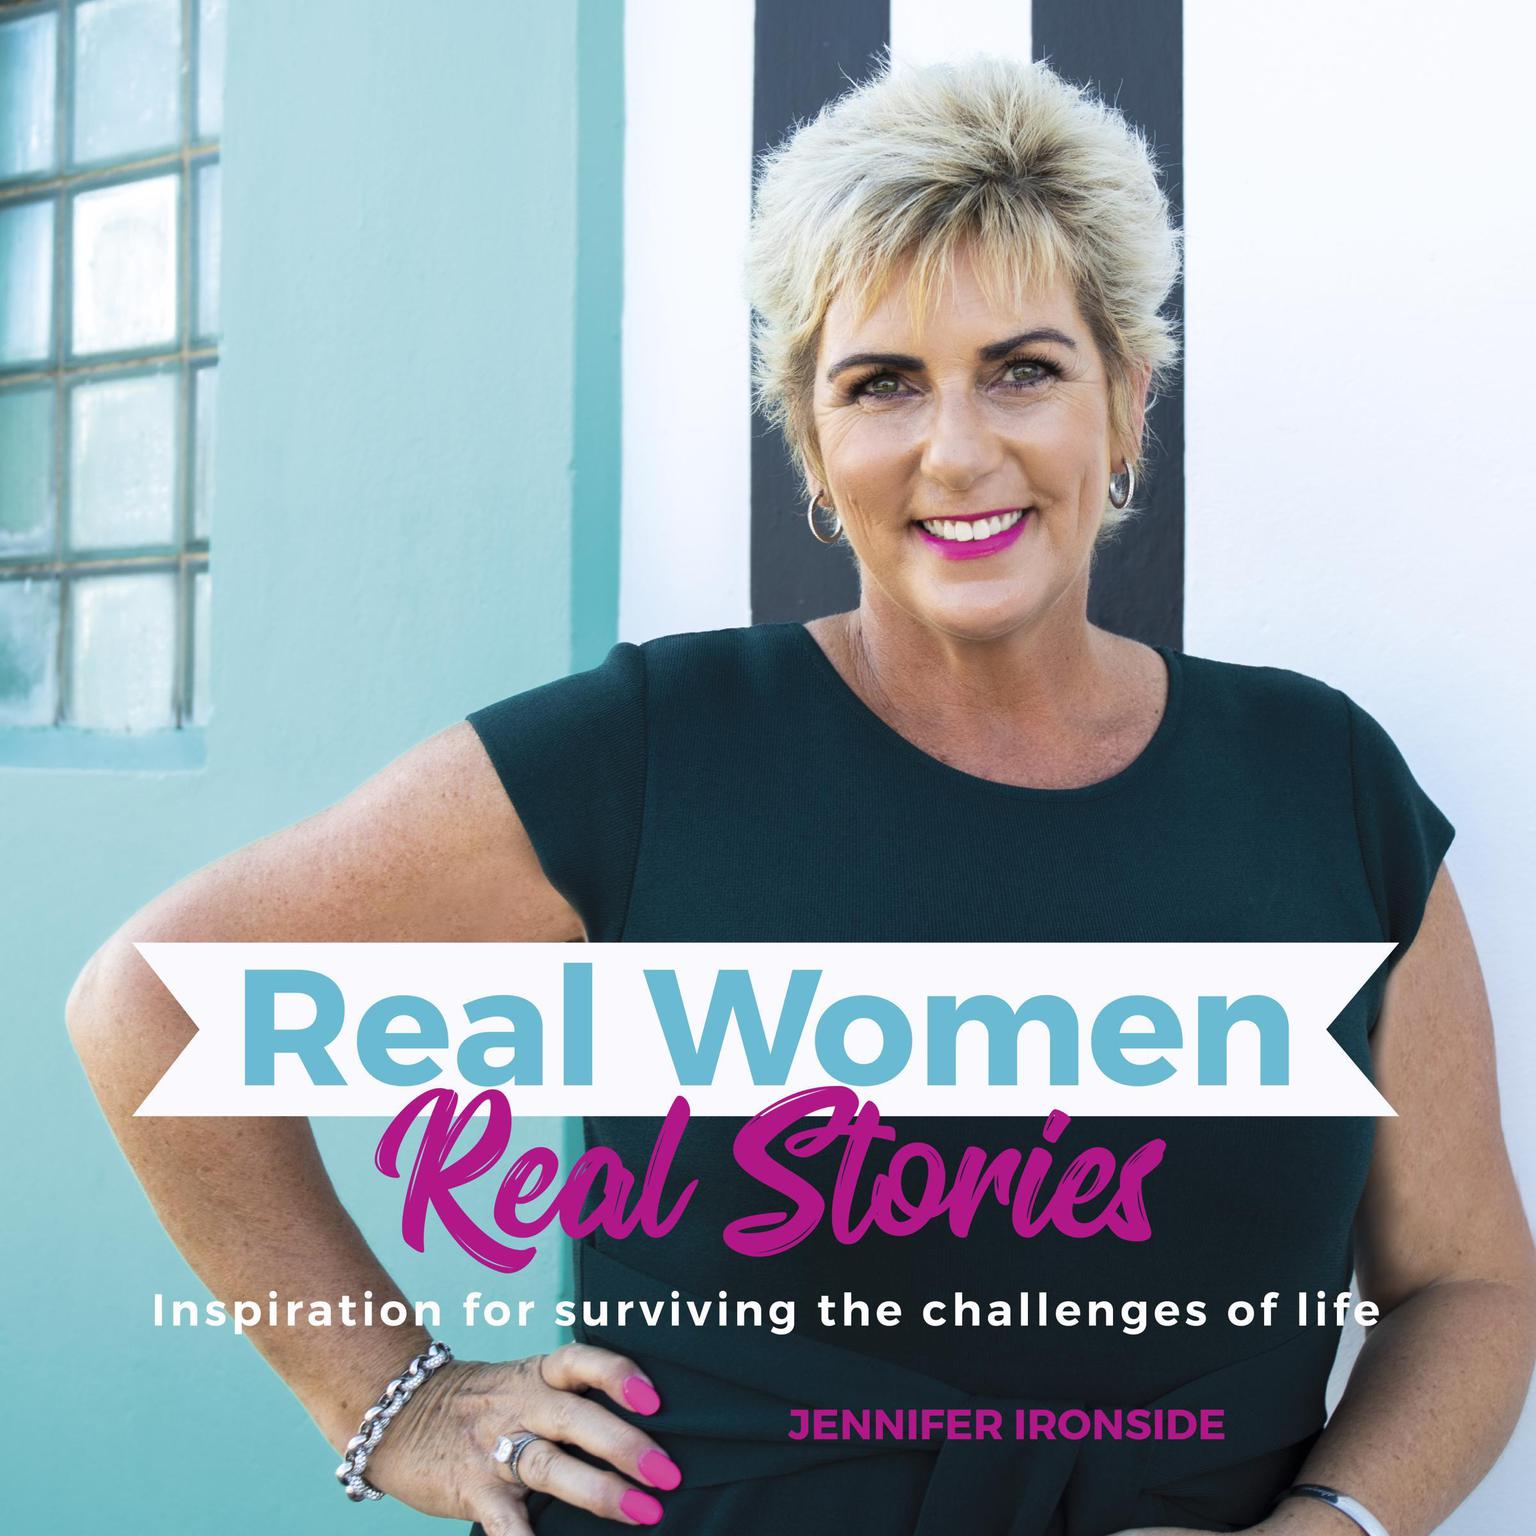 Real Women, Real Stories: Inspiration for surviving the challenges of life Audiobook, by Jennifer Ironside